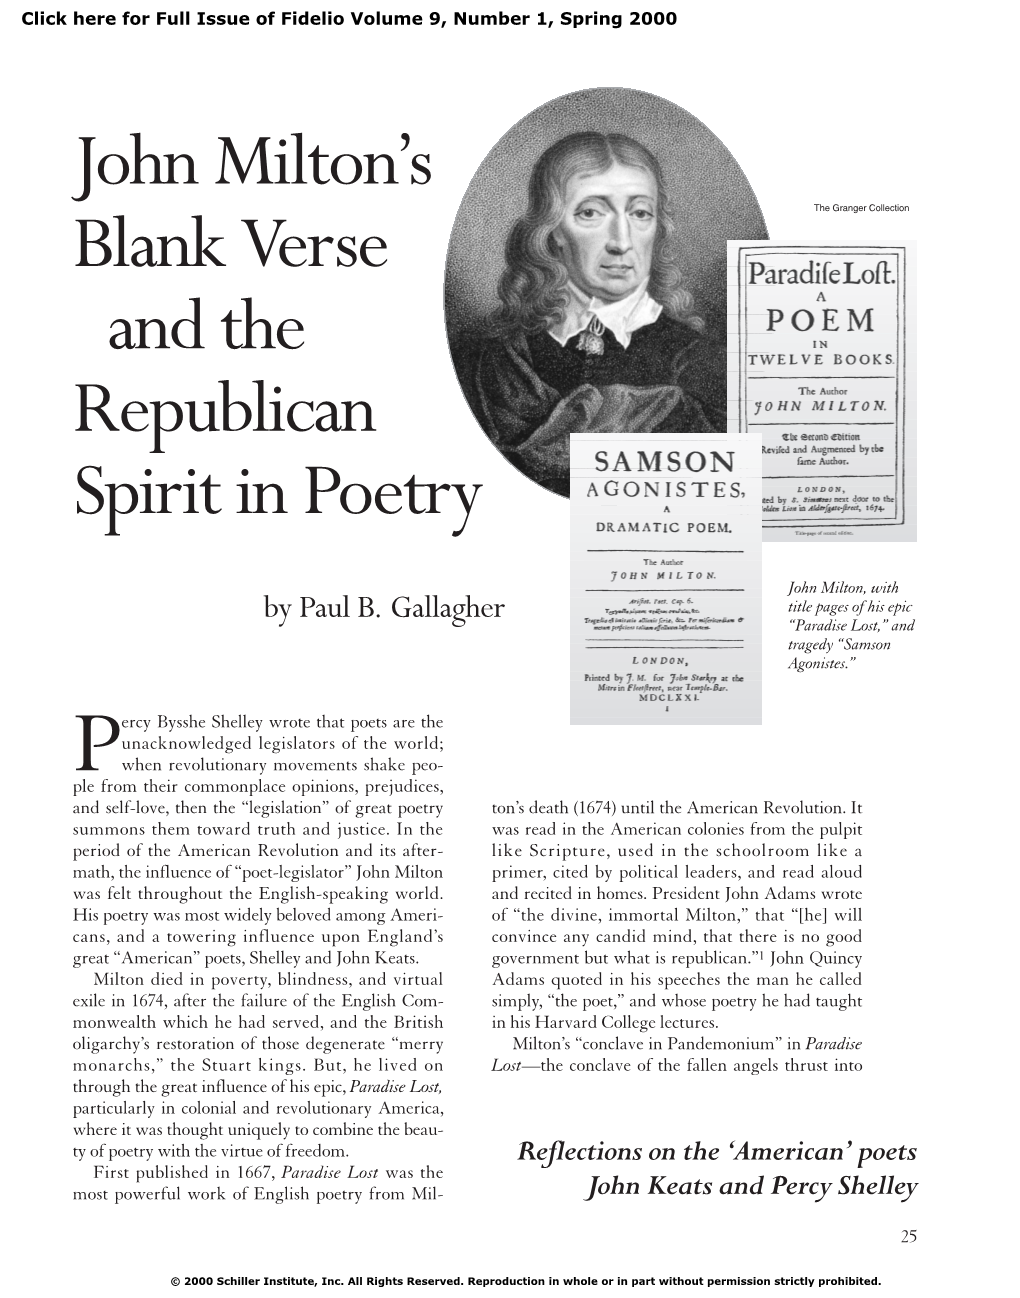 John Milton's Blank Verse and the Republican Spirit in Poetry